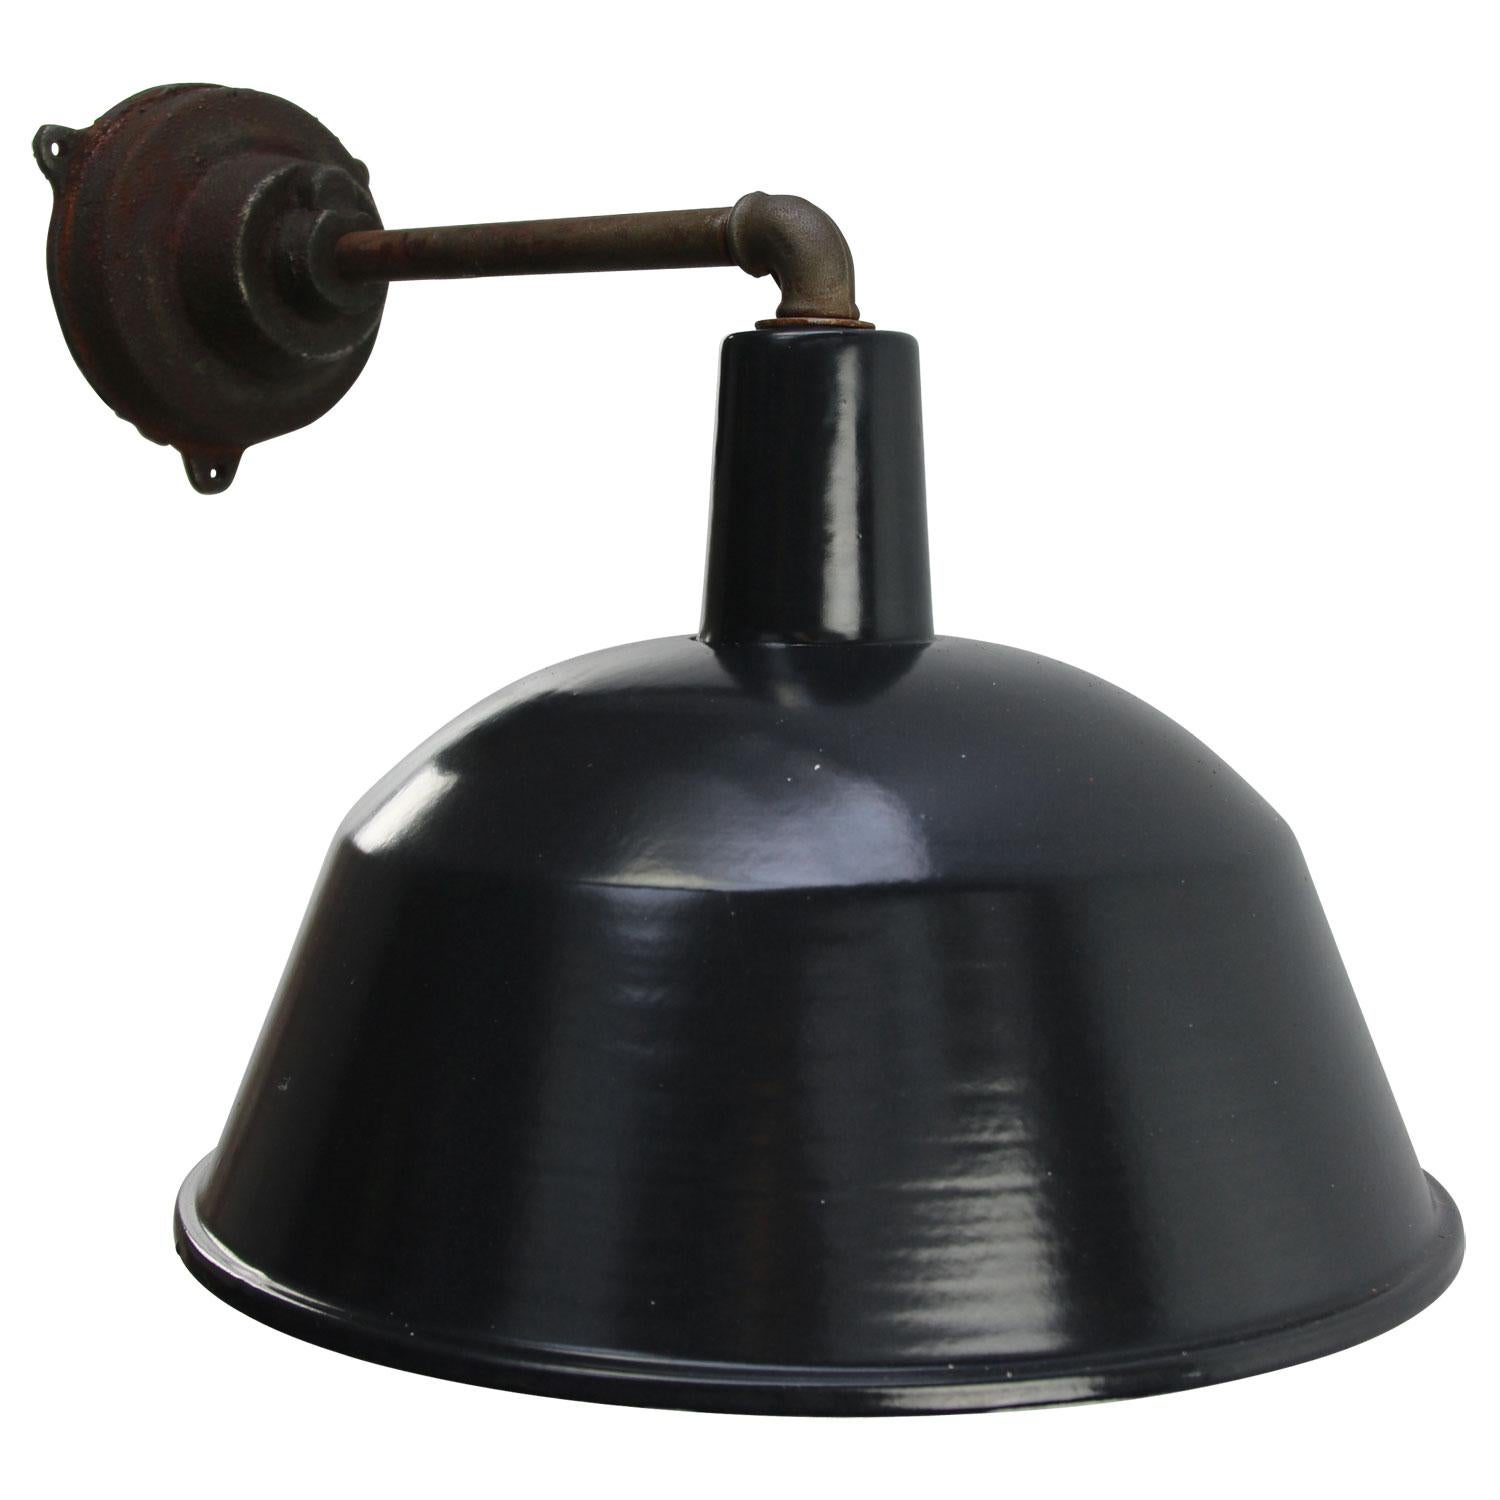 Factory wall light
Black / very dark gray enamel, white interior

Weight: 3.1 kg / 6.8 lb

Priced per individual item. All lamps have been made suitable by international standards for incandescent light bulbs, energy-efficient and LED bulbs.